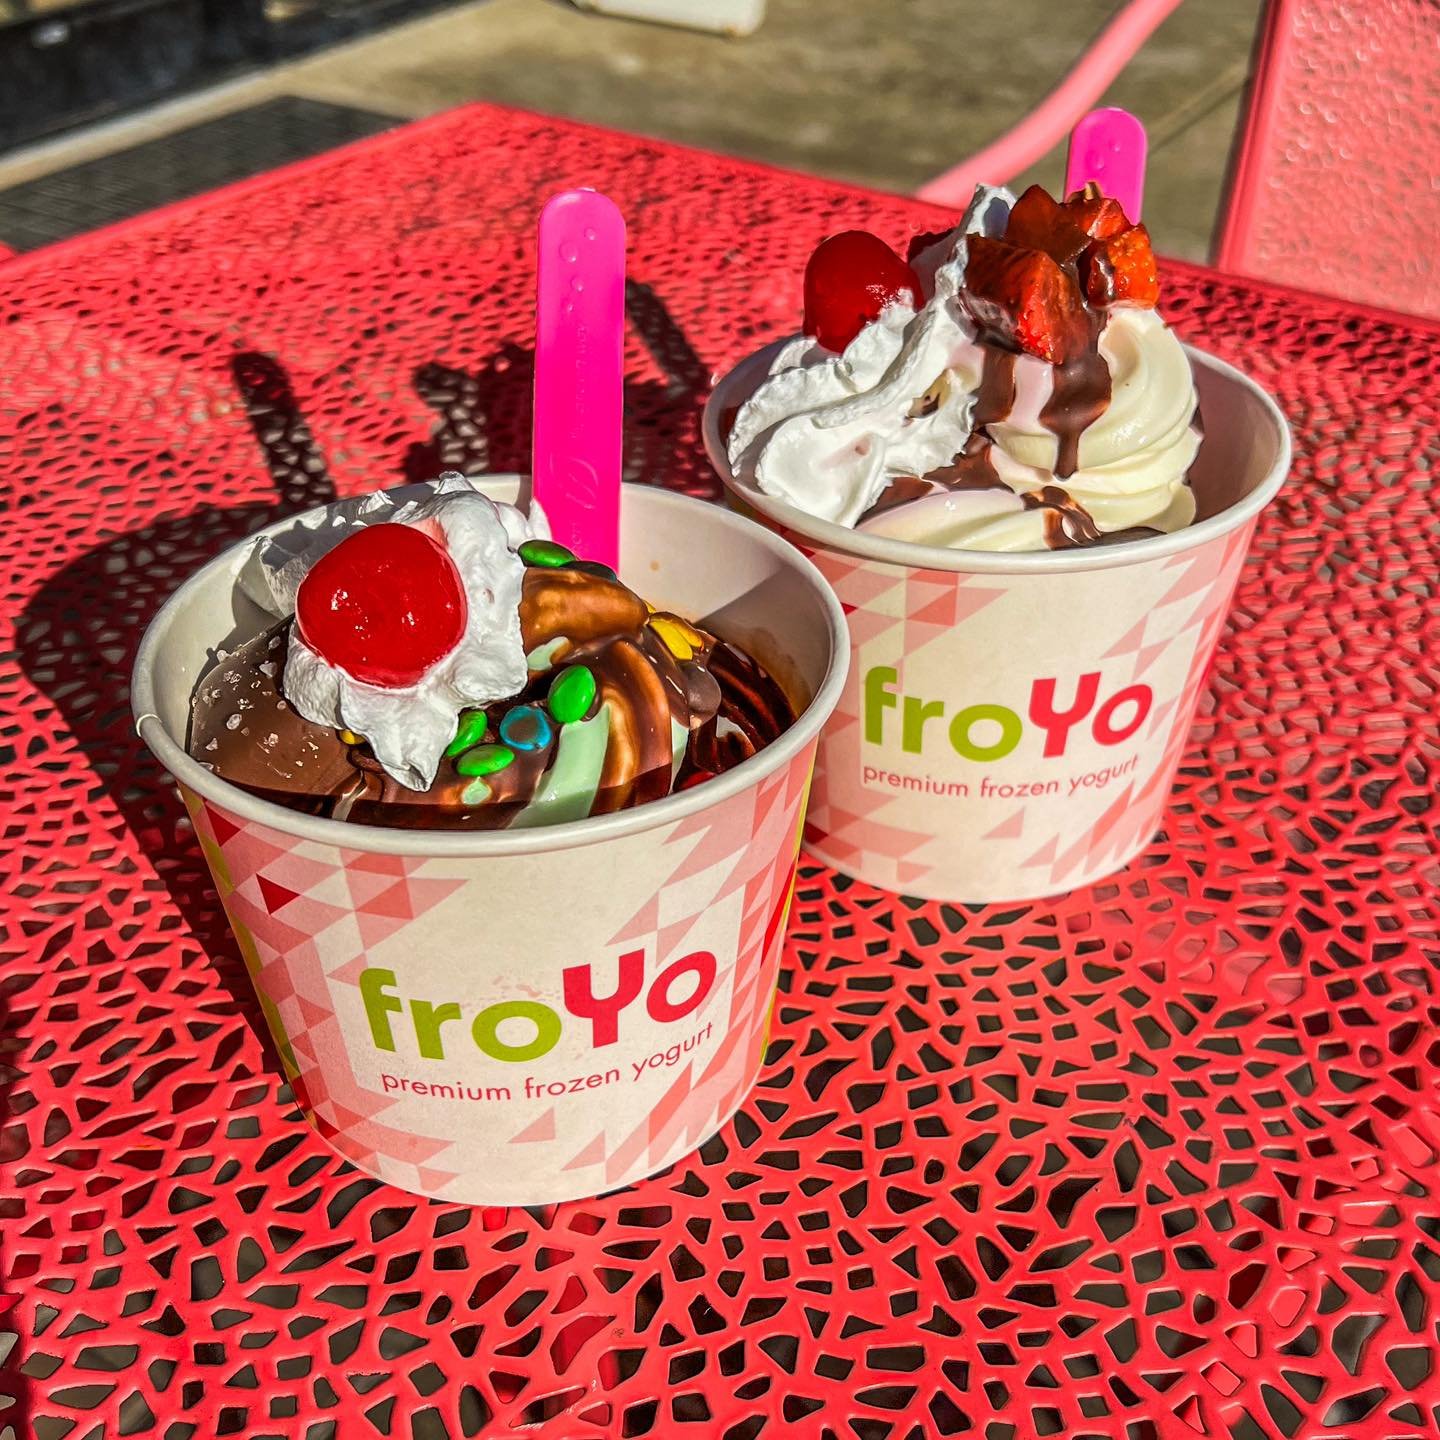 Hey Froyo fans! 🍦🌈 Why not make this Tuesday extra sweet? Treat your bestie to a delicious frozen yogurt adventure! Whether you're into classic vanilla or Pomegranate Raspberry, share a bowl and sprinkle on the smiles. 🥄✨

#BestieDayOut #FroyoFun 